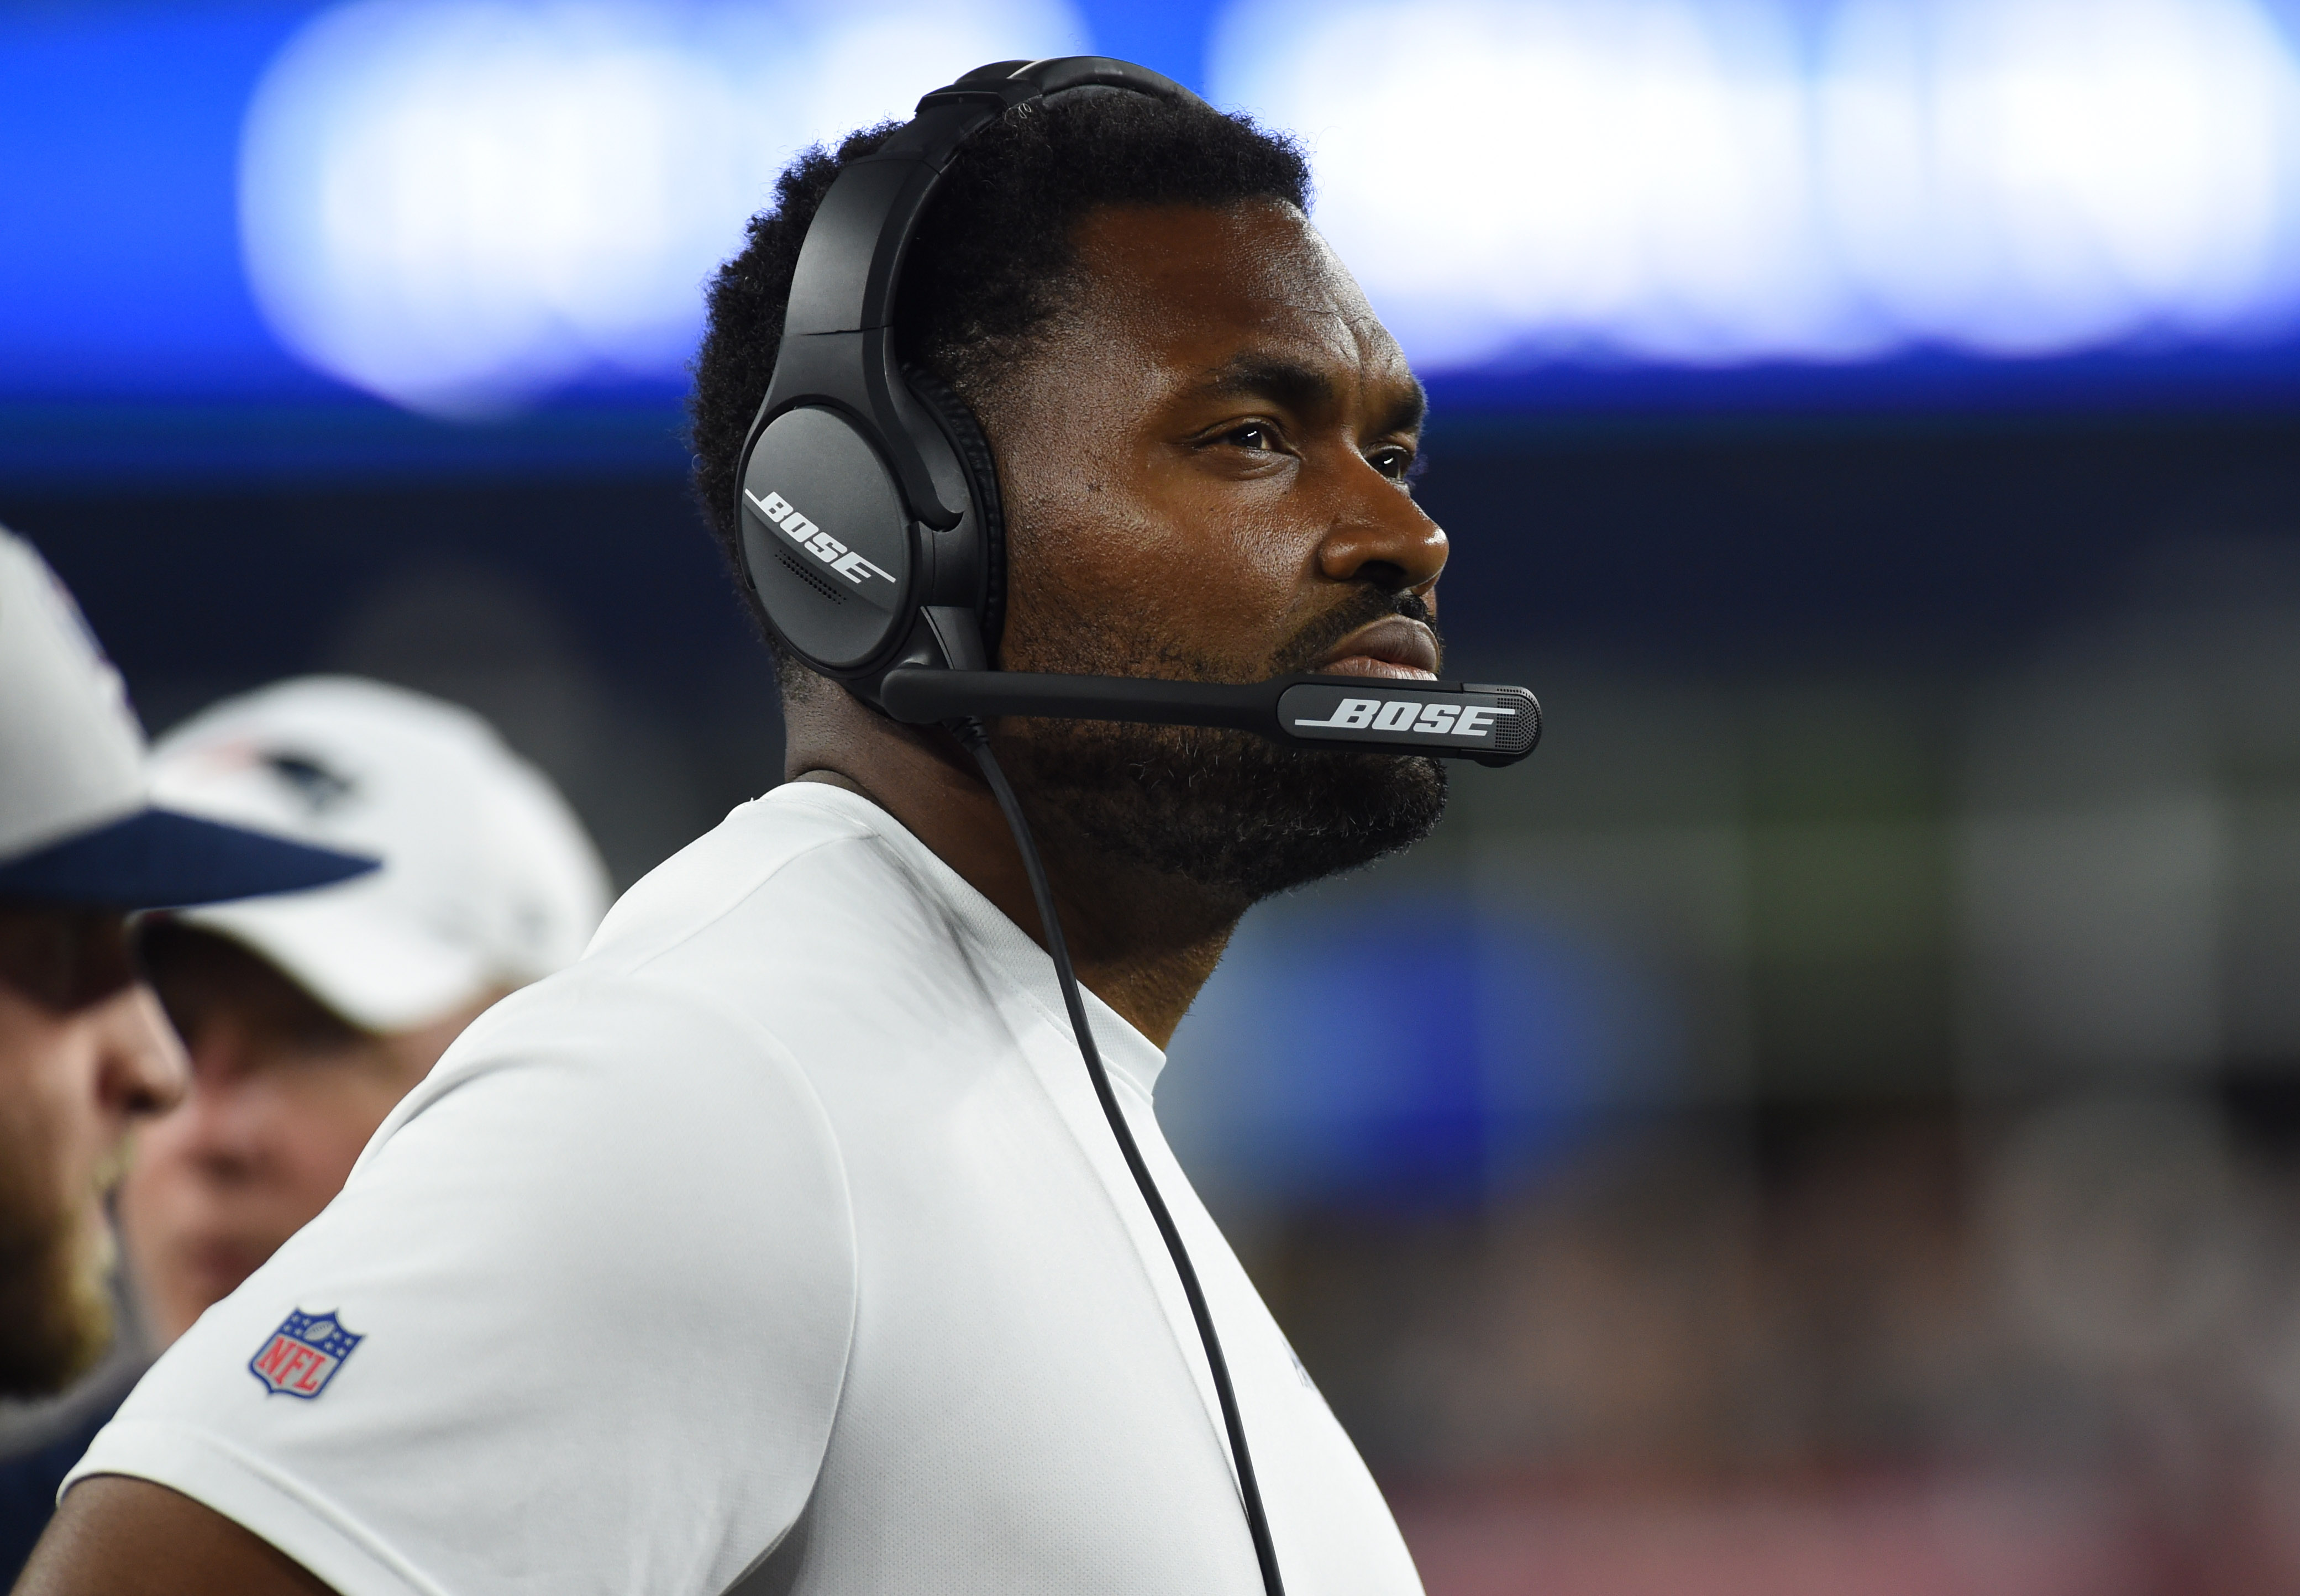 New England Patriots linebackers coach Jerod Mayo watches the action during the second half against the New York Giants at Gillette Stadium.